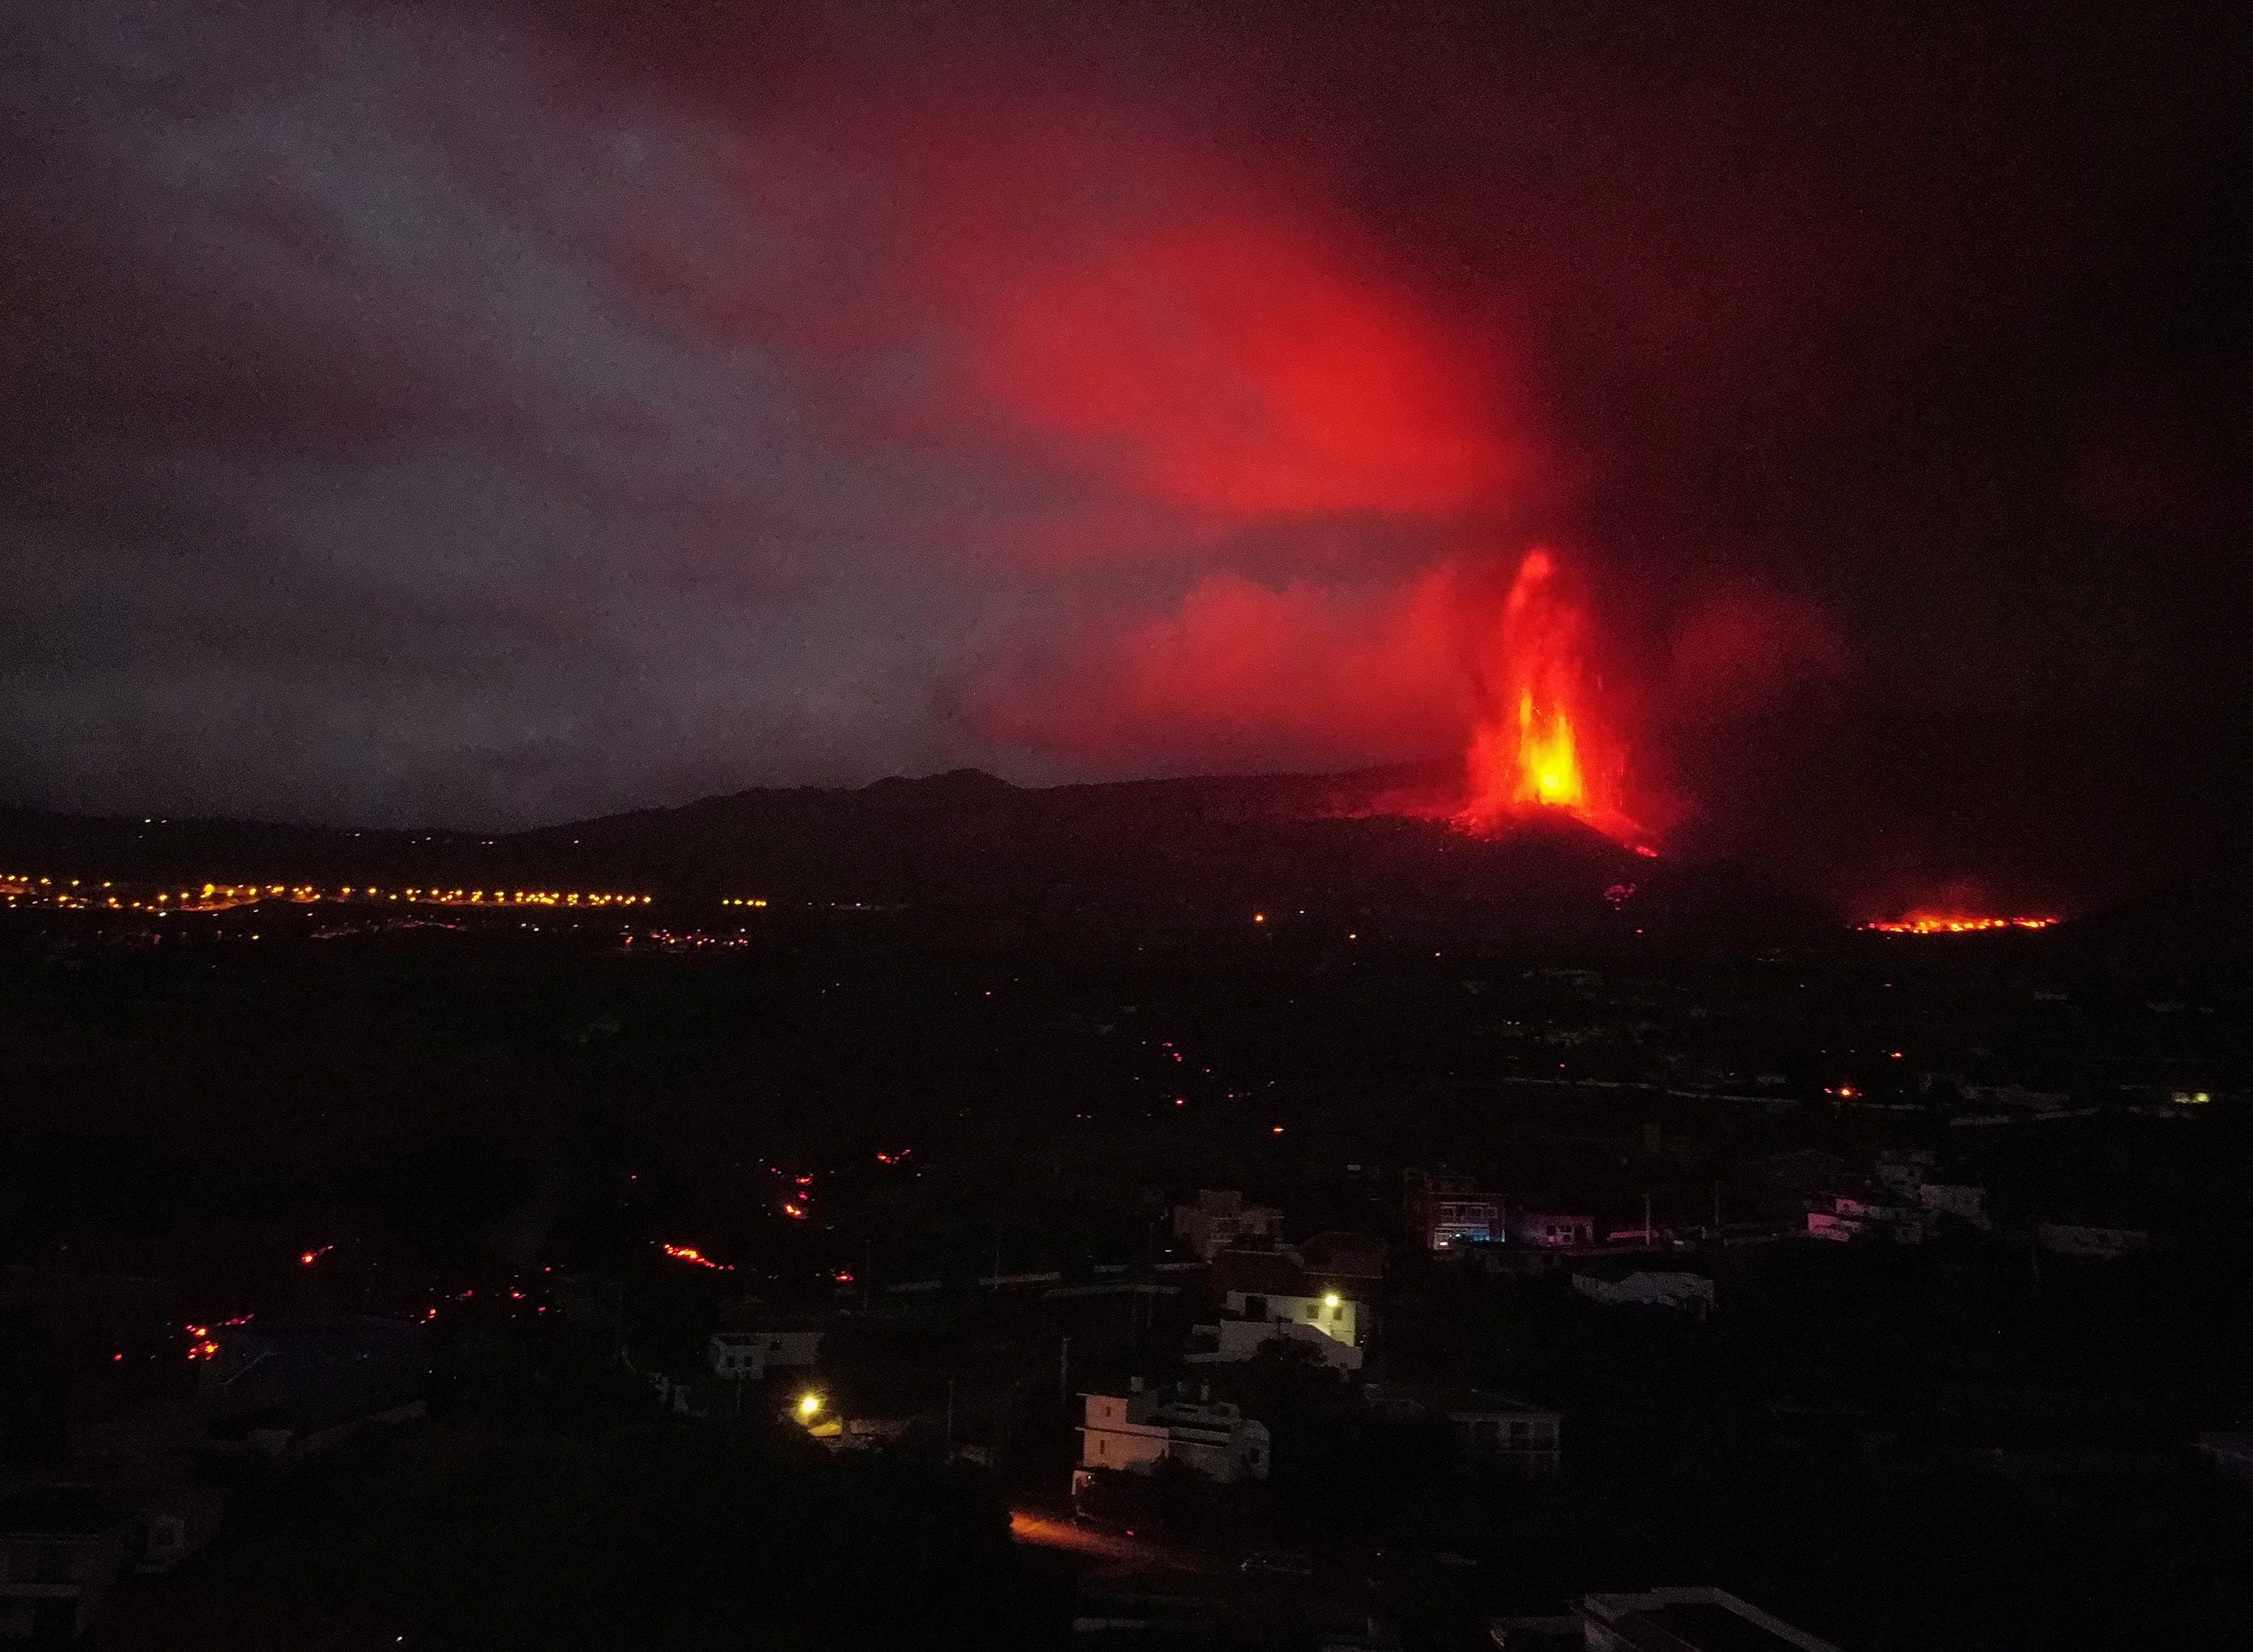 Canaries volcano blasts lava into the air as ash blankets area